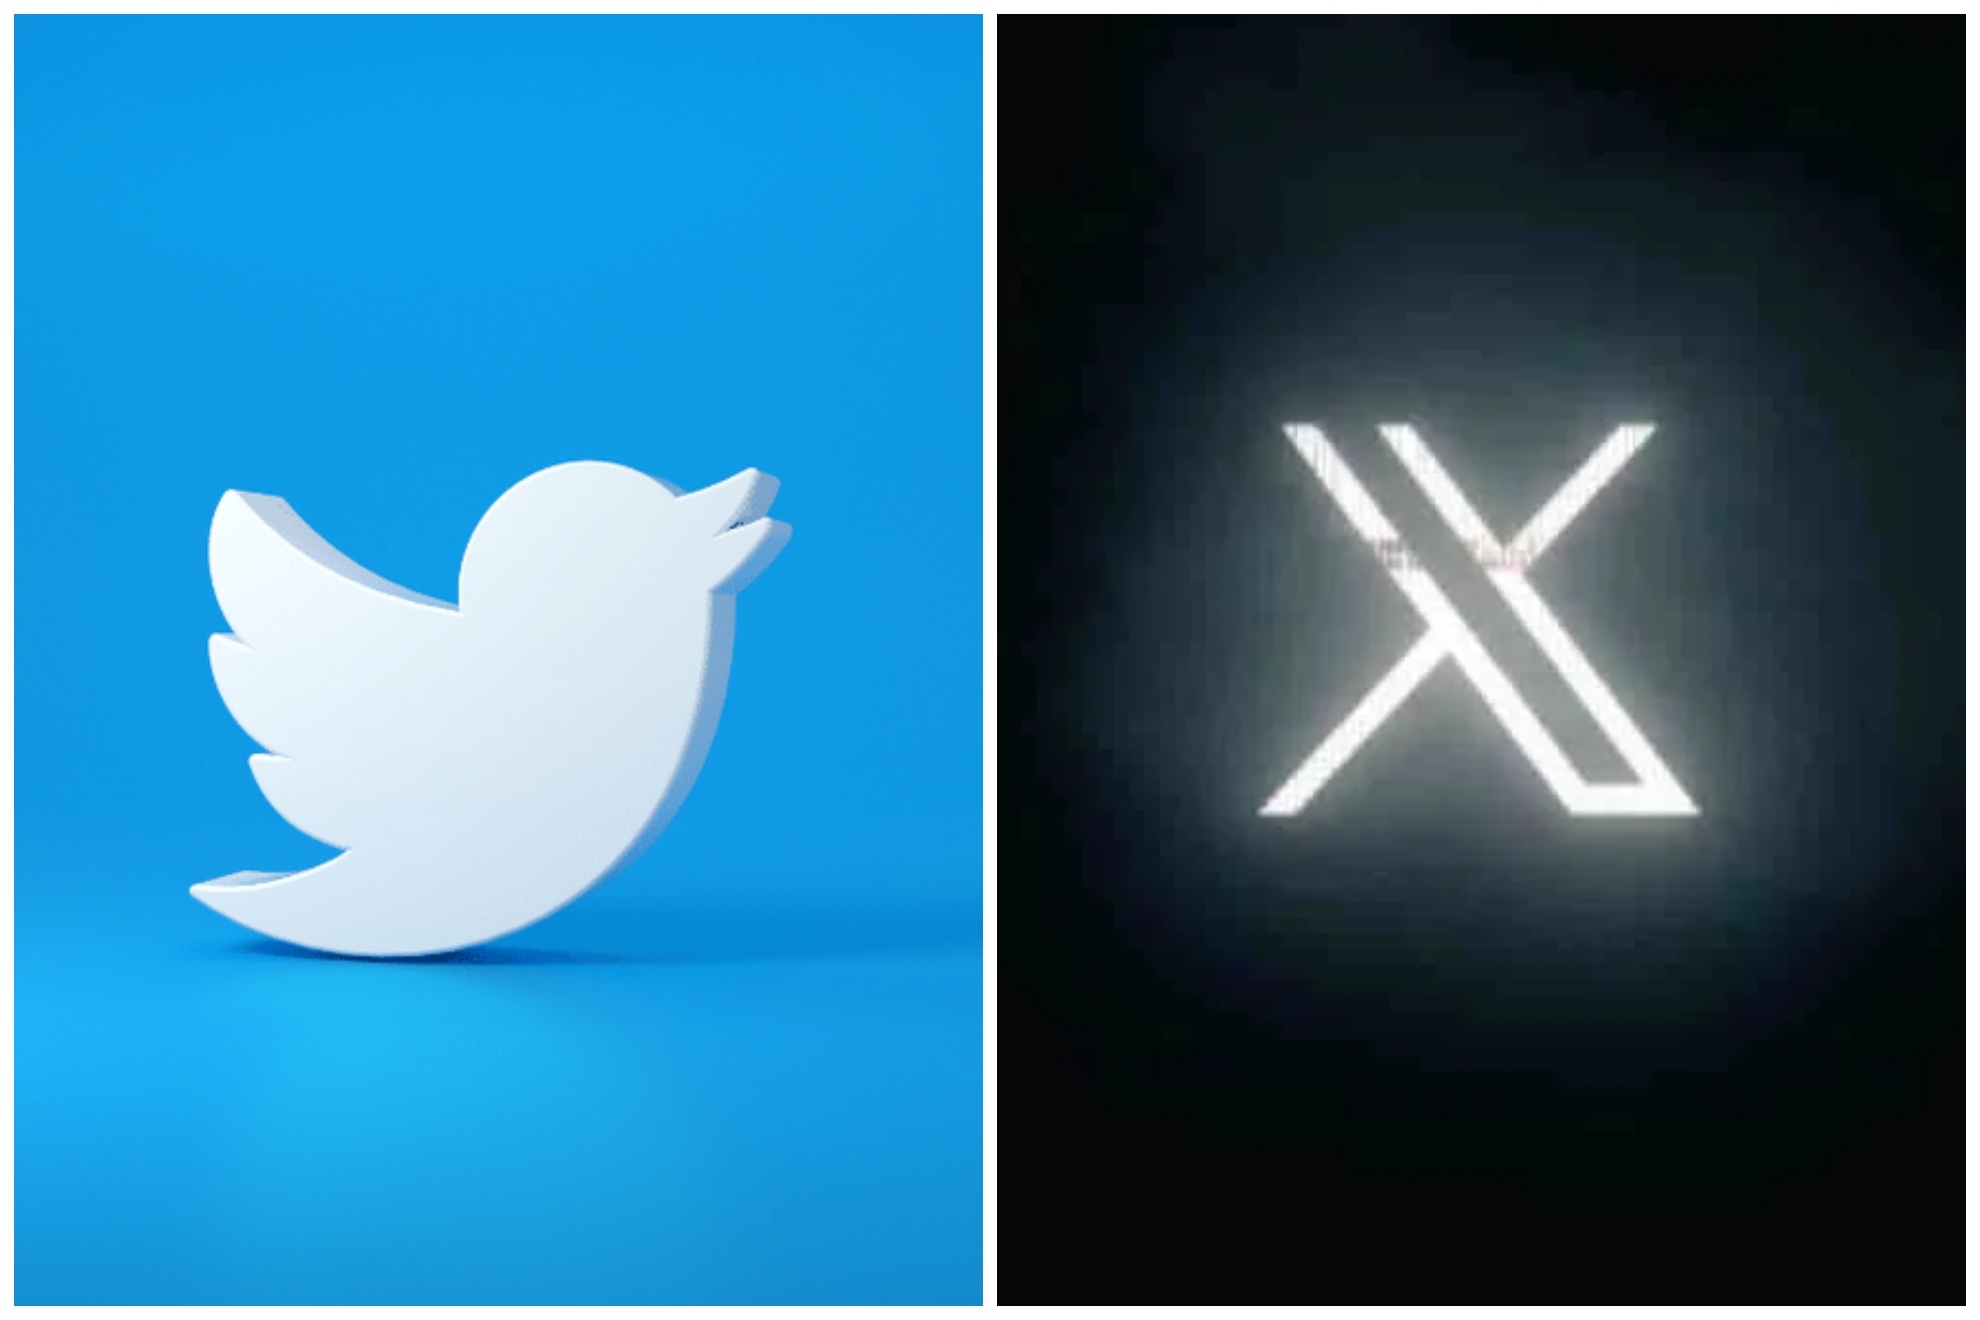 Elon Musk changes Twitter's logo and name: the new platform is called 'X'.